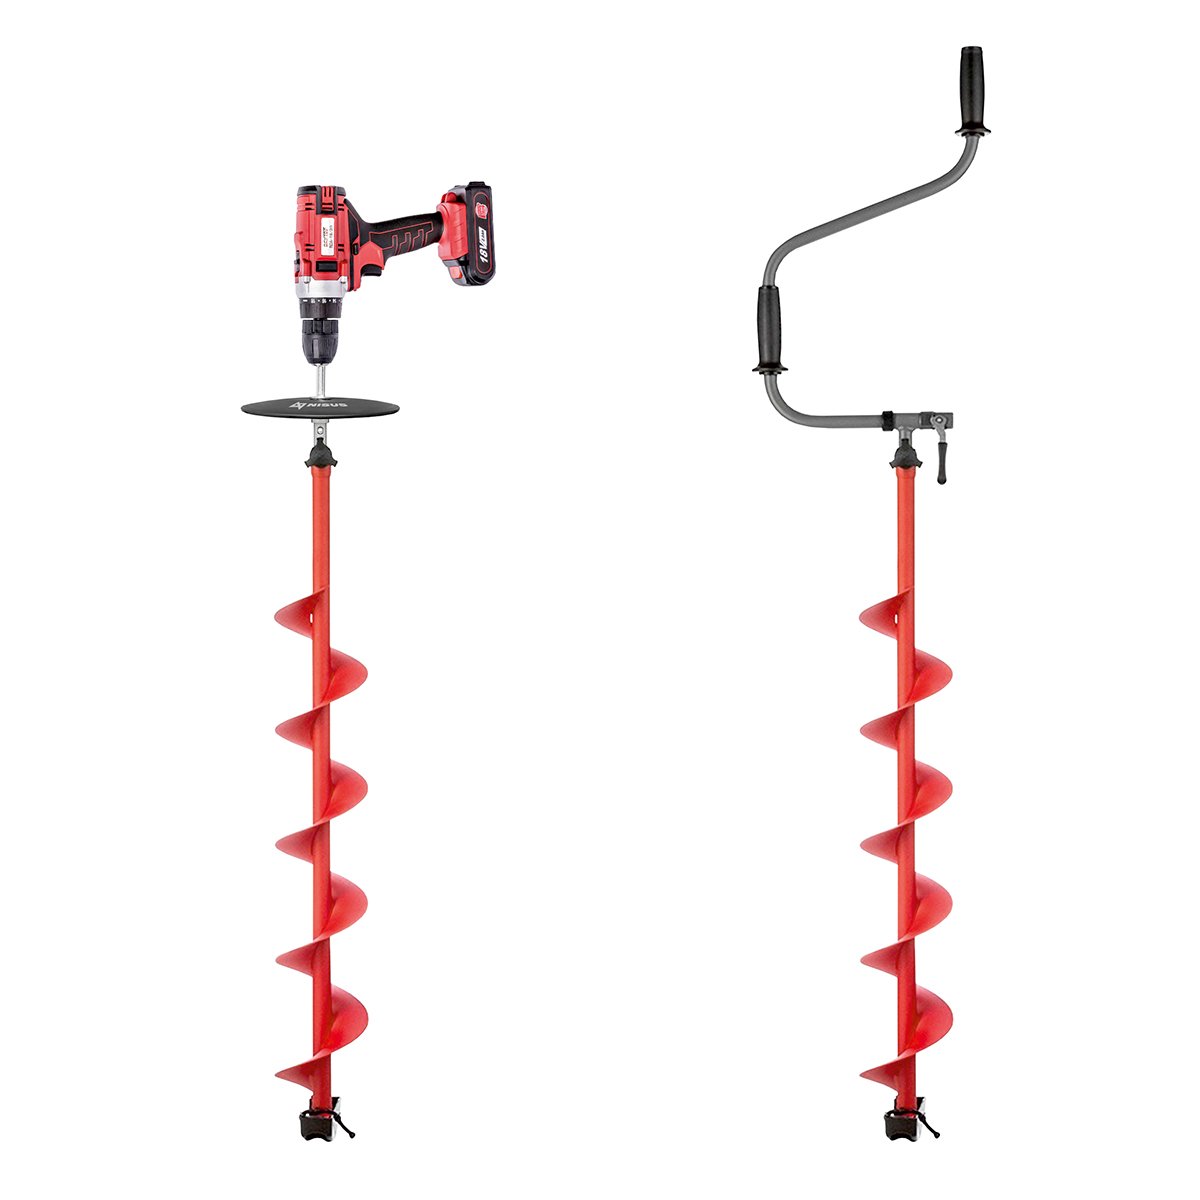 Buran Ice Fishing Auger is easily turned into a power auger with the help of ice auger drill adapter with a safety plate